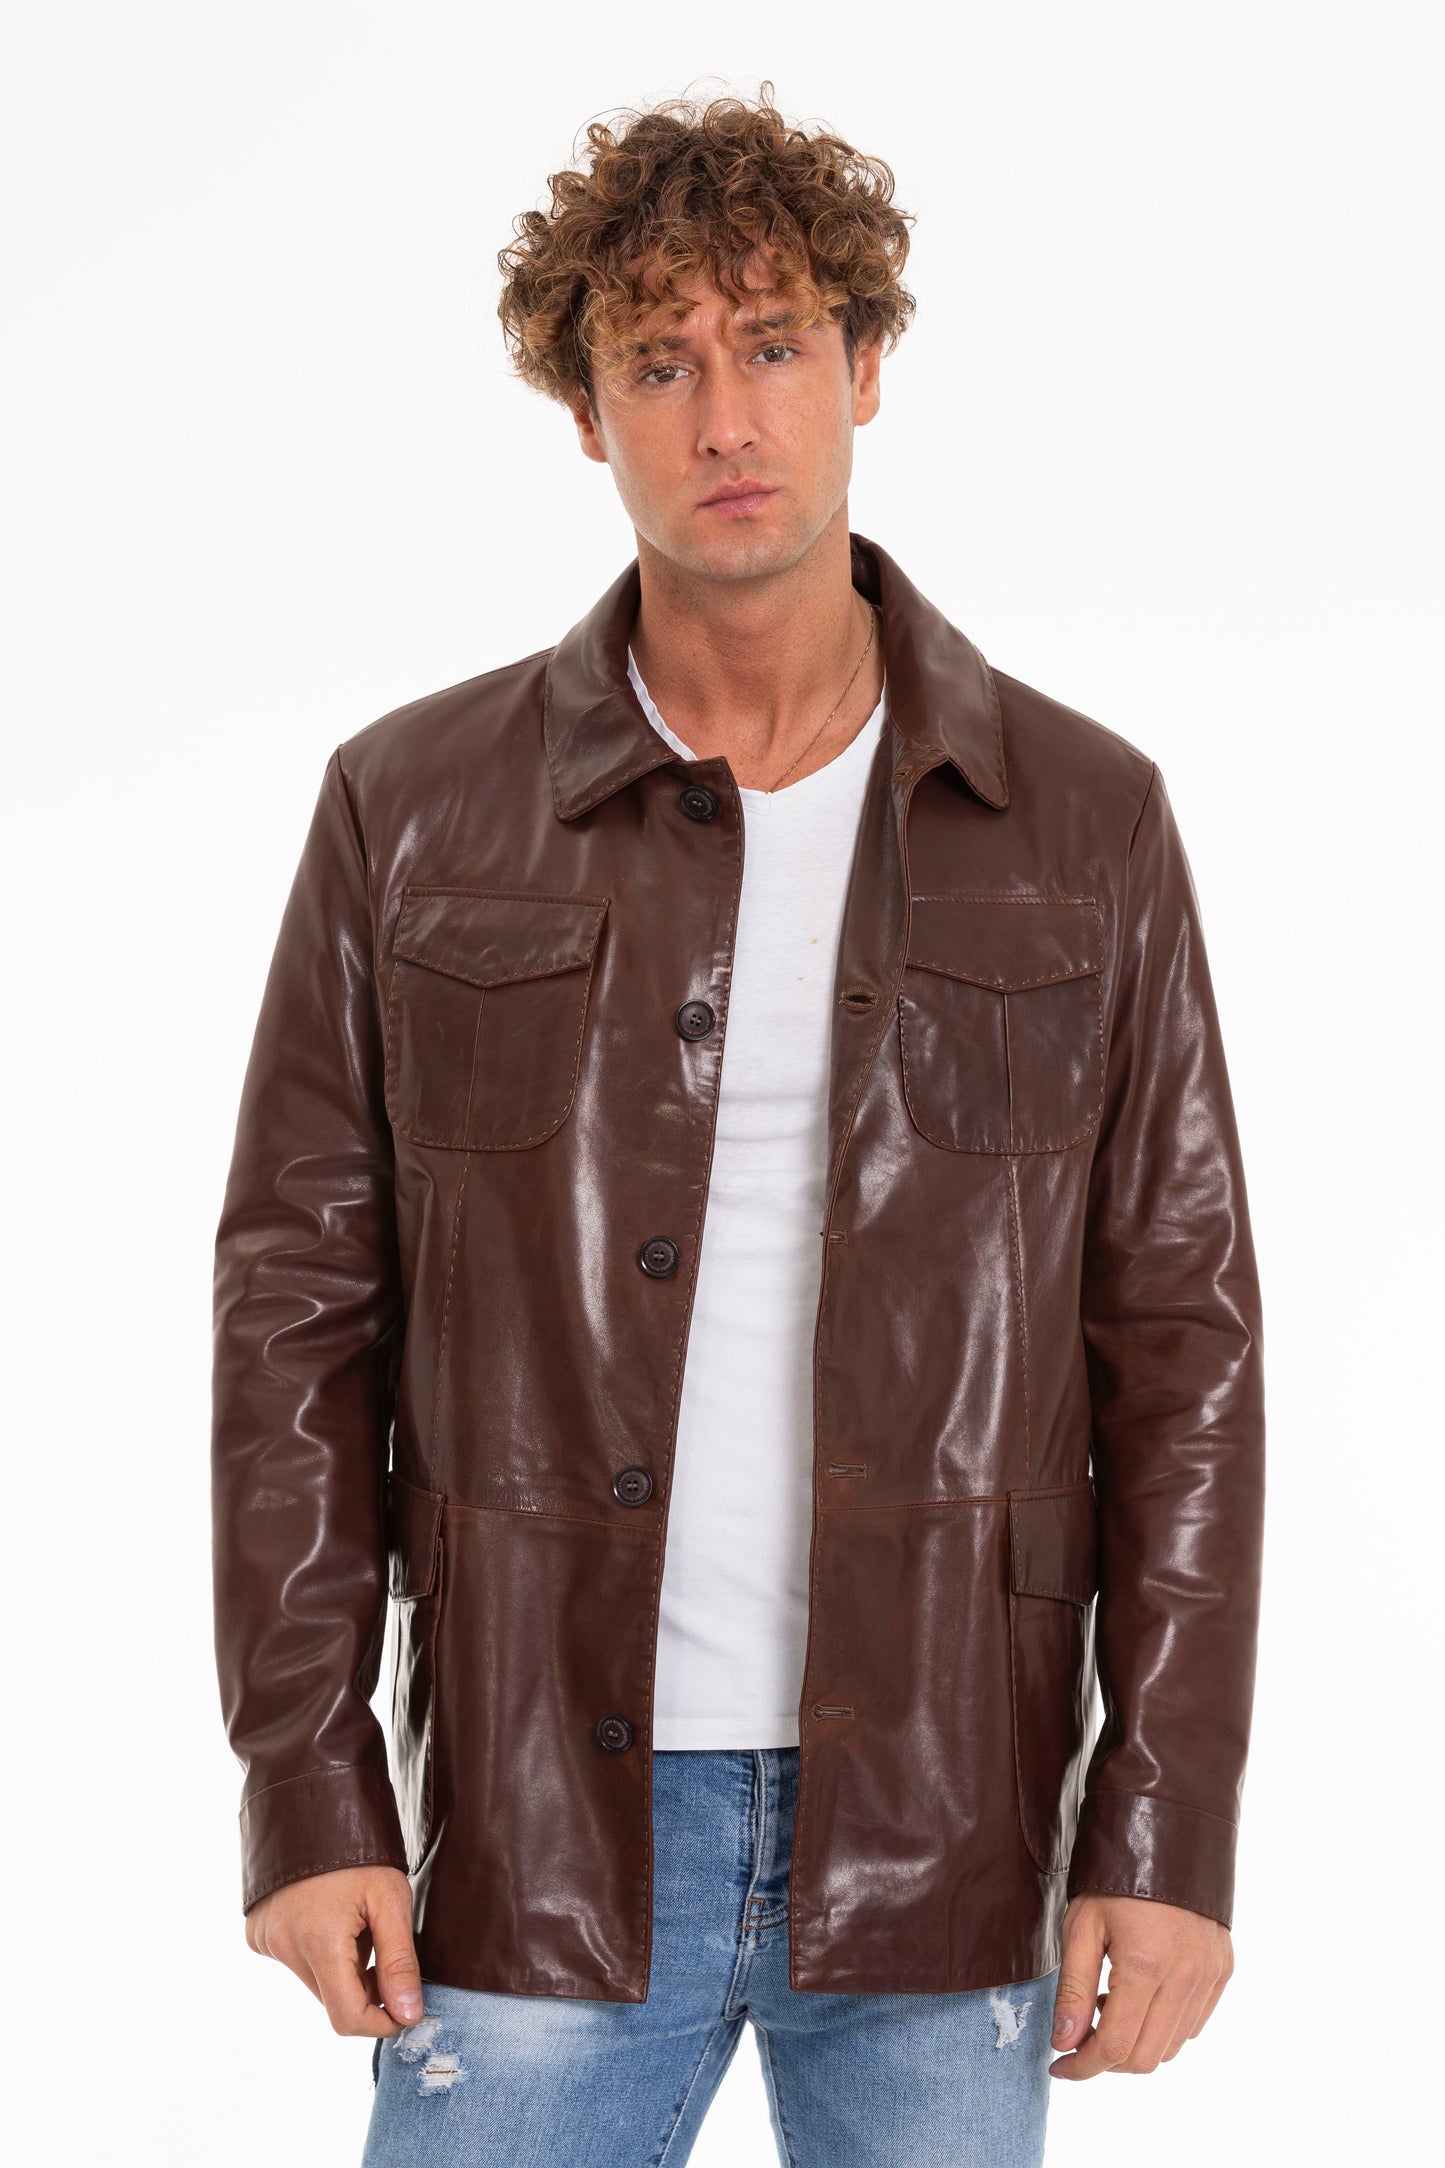 The Turro Brown Leather Men Jacket